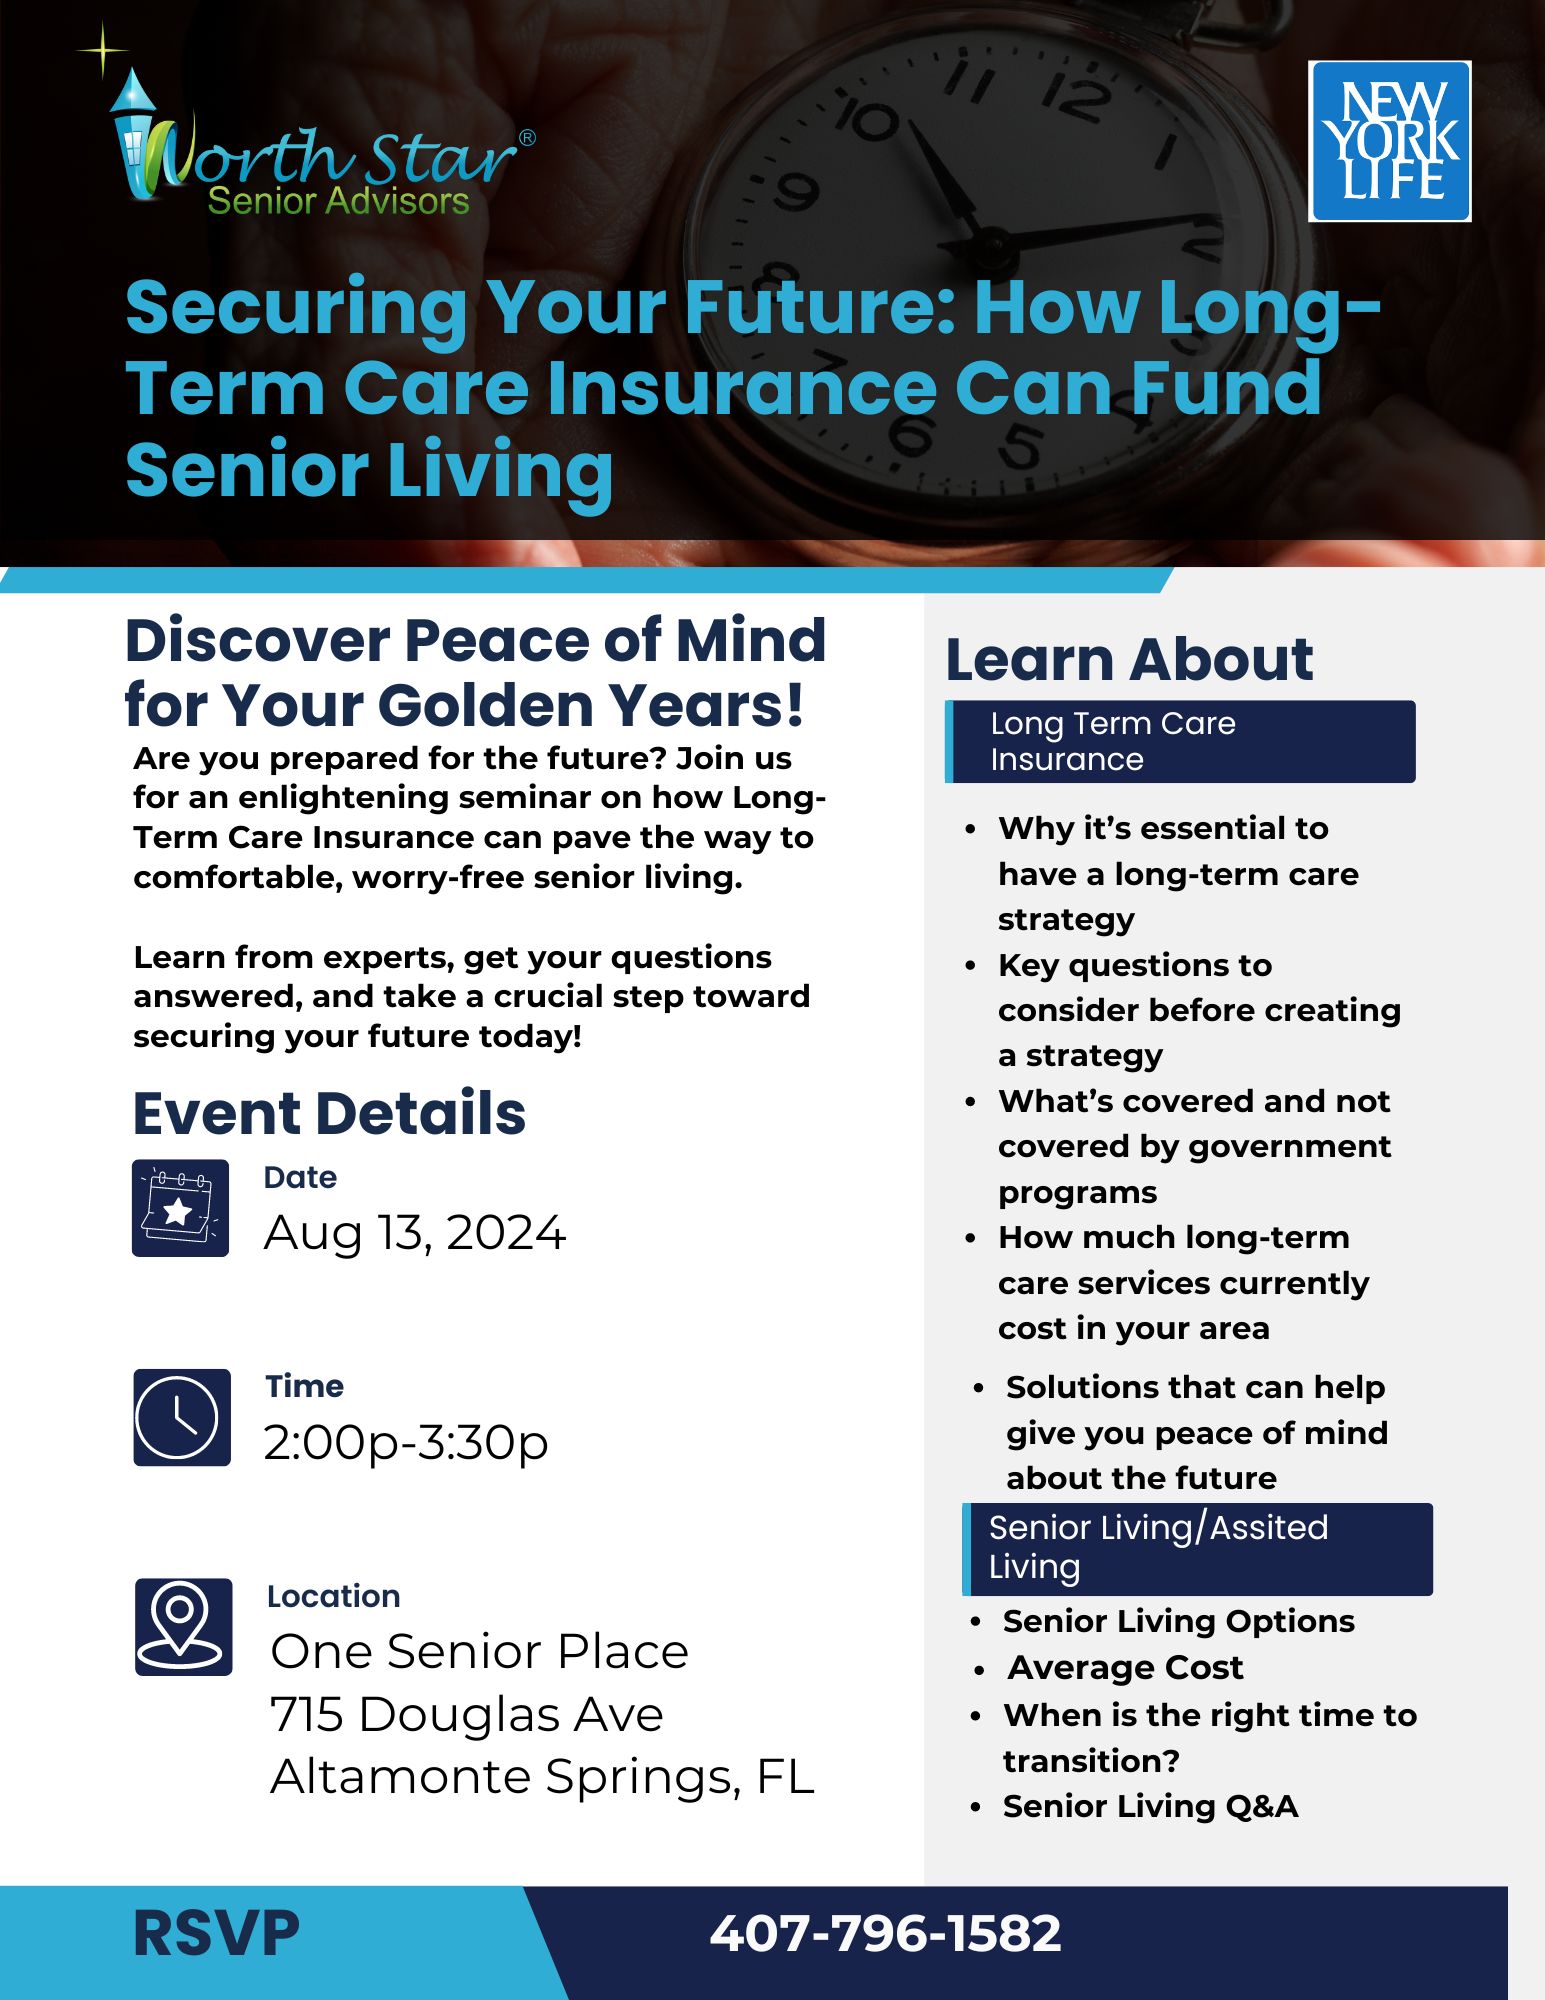 Securing Your Future: How Long-Term Care Insurance Can Fund Senior Living